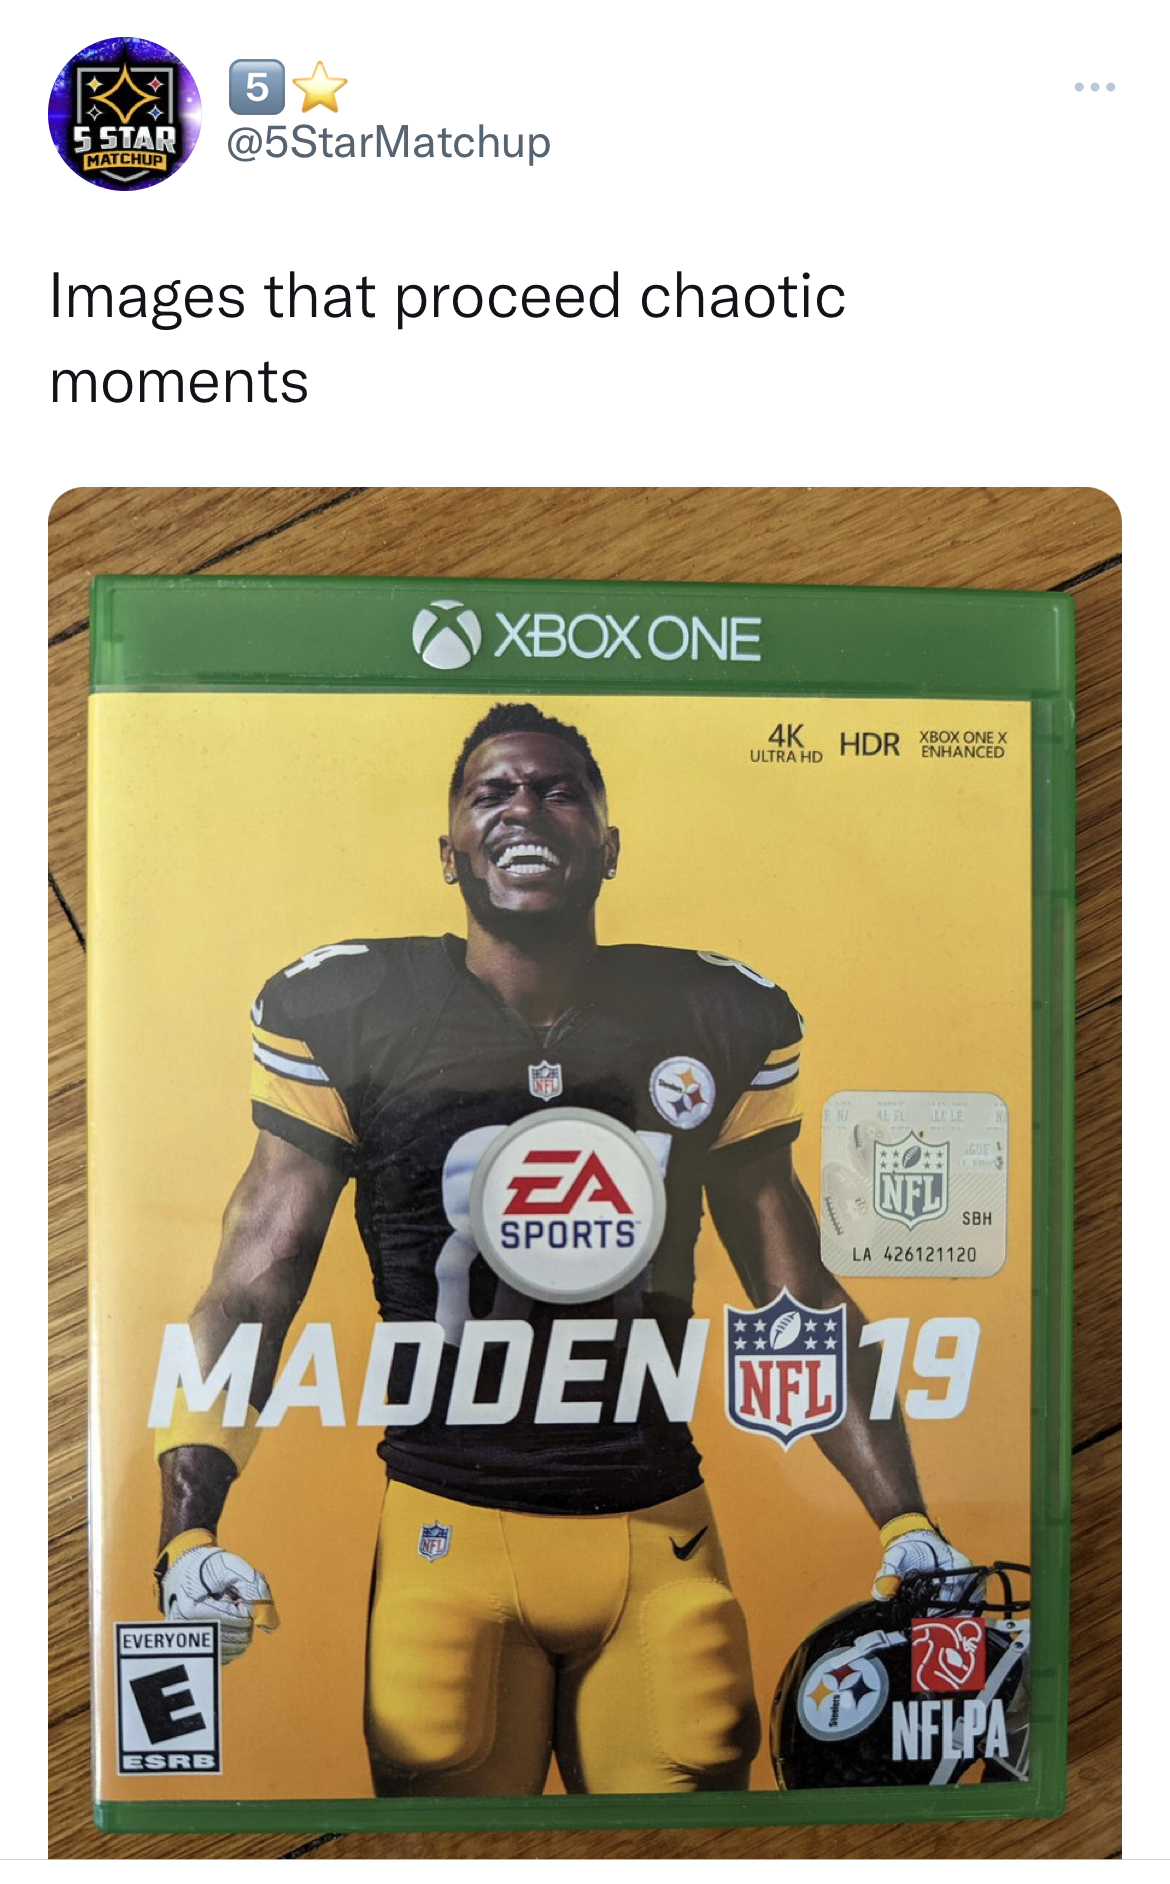 Tweets roasting celebrities - madden nfl 19 ps4 - Ba 5STAR Images that proceed chaotic moments Erana Tay Xboxone Everyda E Esso Ea Sports Hdr L Madden 19 787 Nflpa